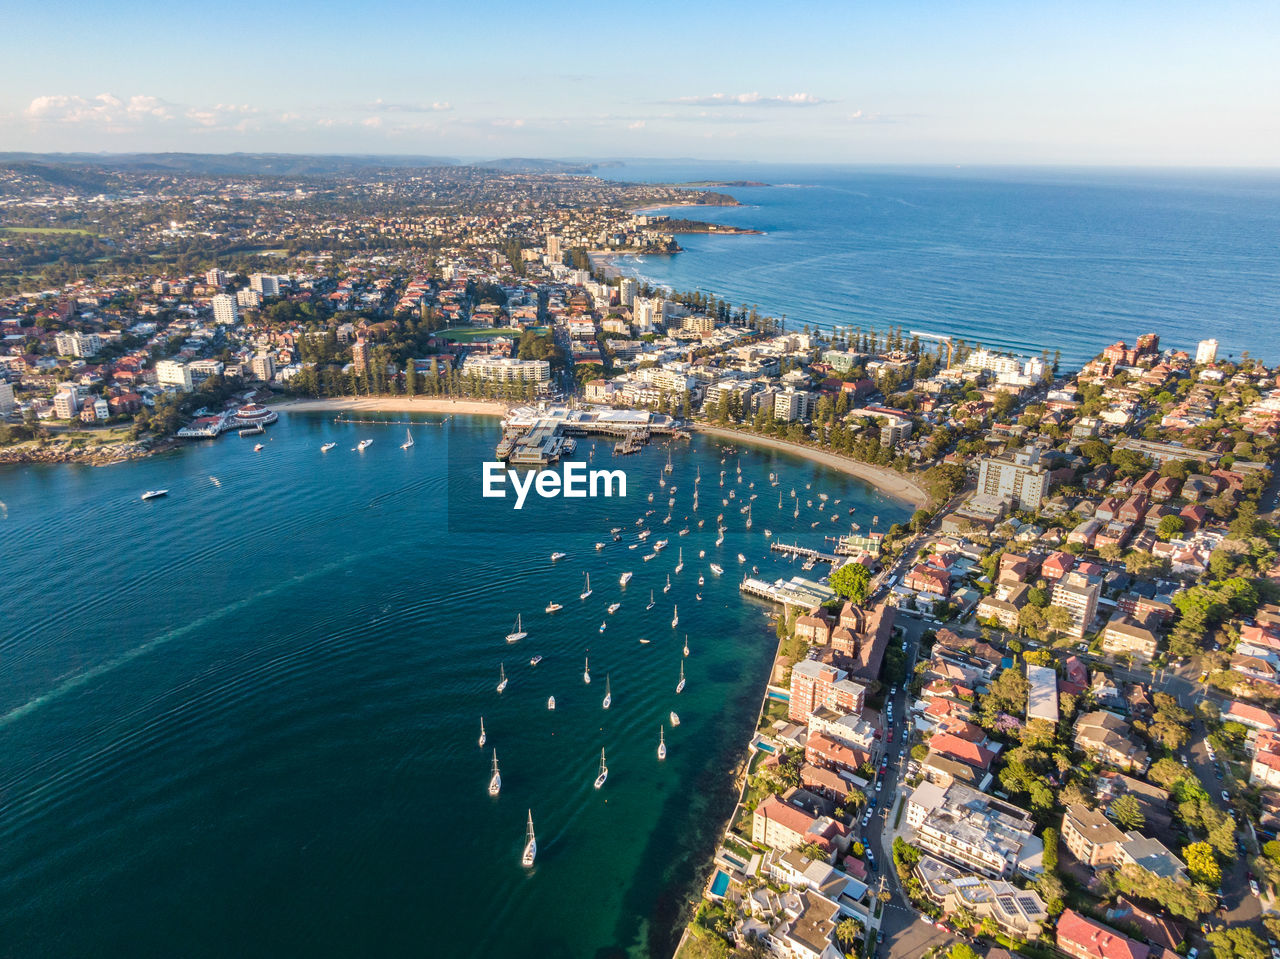 Drone view of manly, sydney, new south wales, australia. manly harbour, manly beach in background.